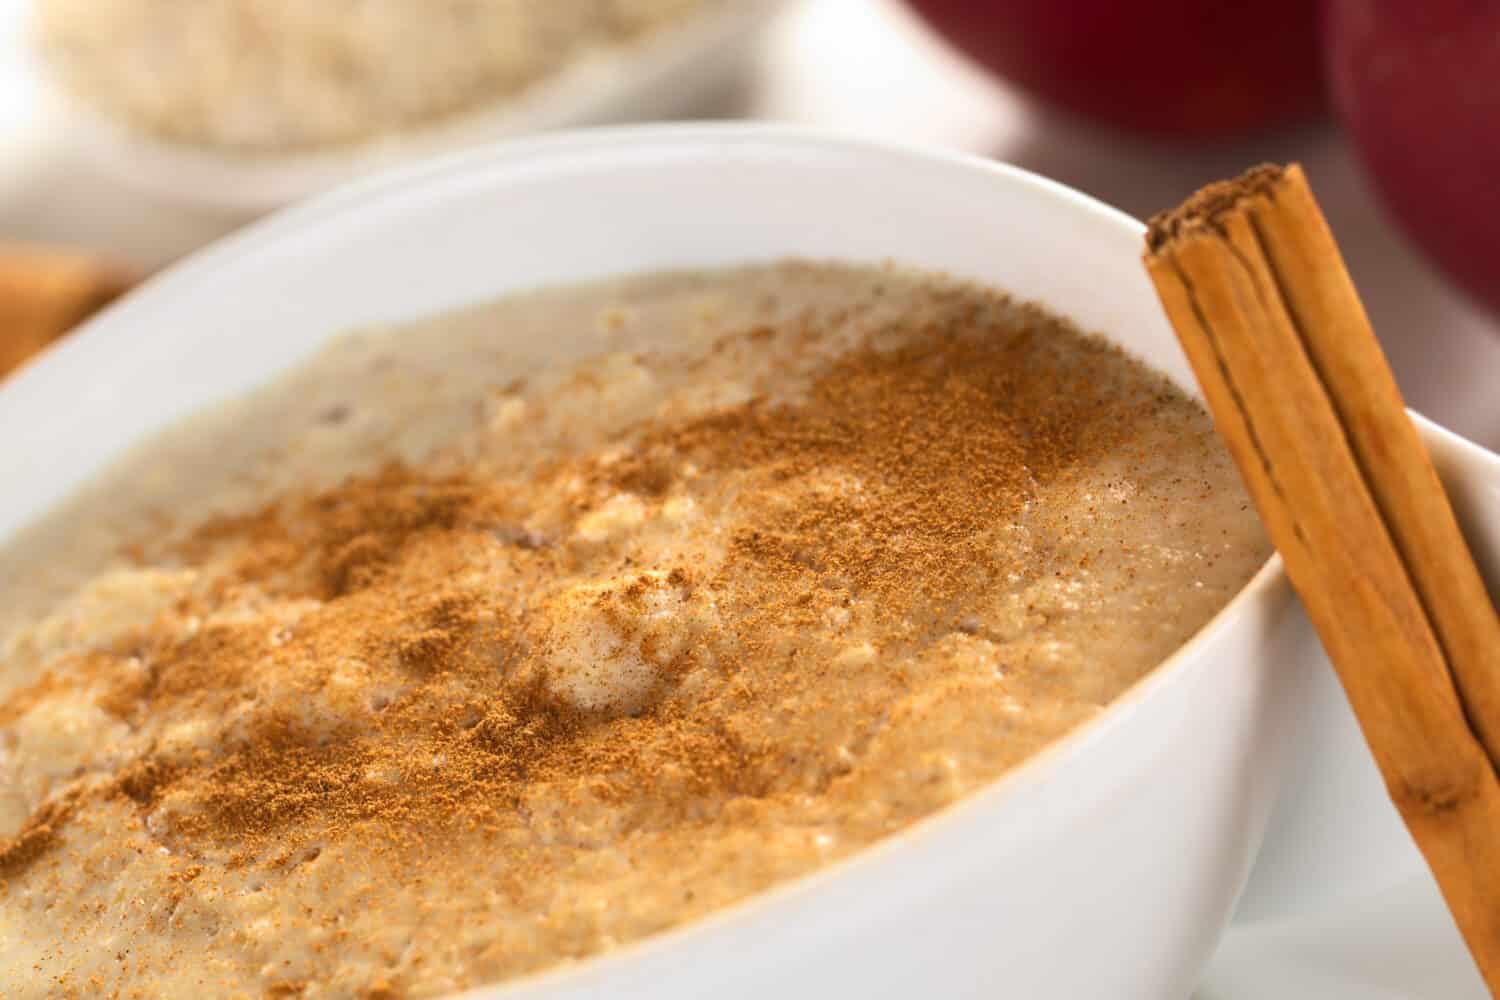 Porridge made of oatmeal and milk served with ground cinnamon and sugar (Selective Focus, Focus one third into the porridge)